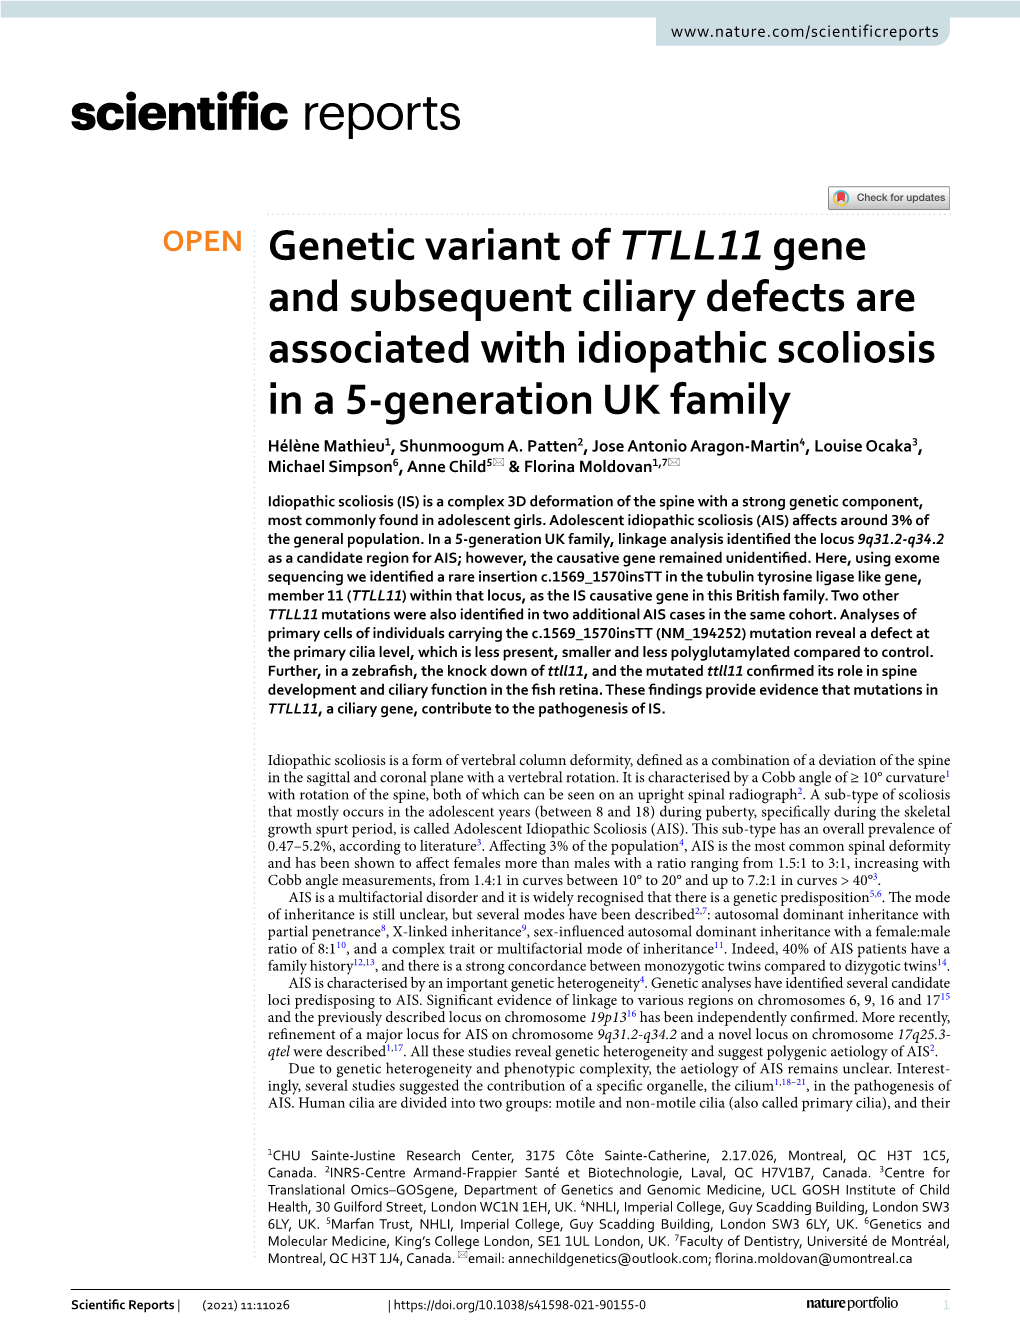 Genetic Variant of TTLL11 Gene and Subsequent Ciliary Defects Are Associated with Idiopathic Scoliosis in a 5-Generation UK Fami